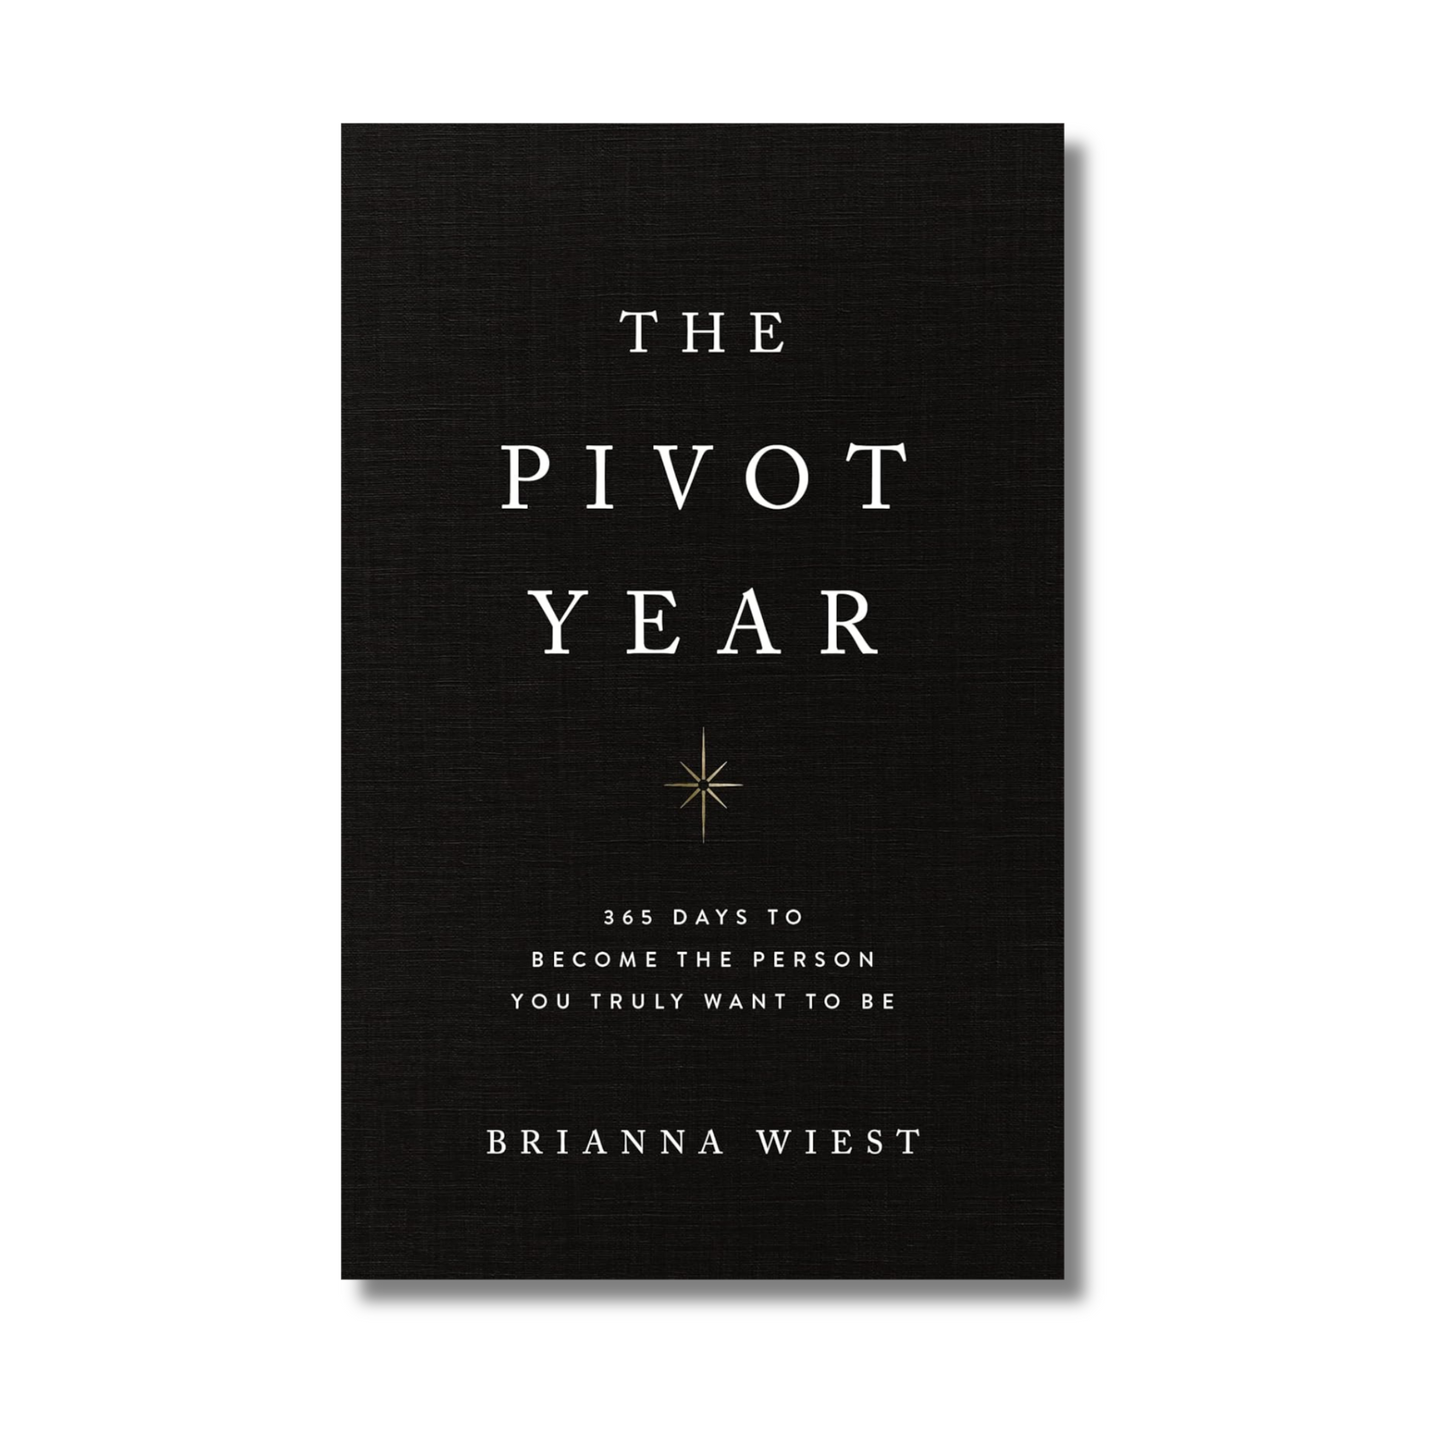 The Pivot Year by Brianna Wiest (Paperback)